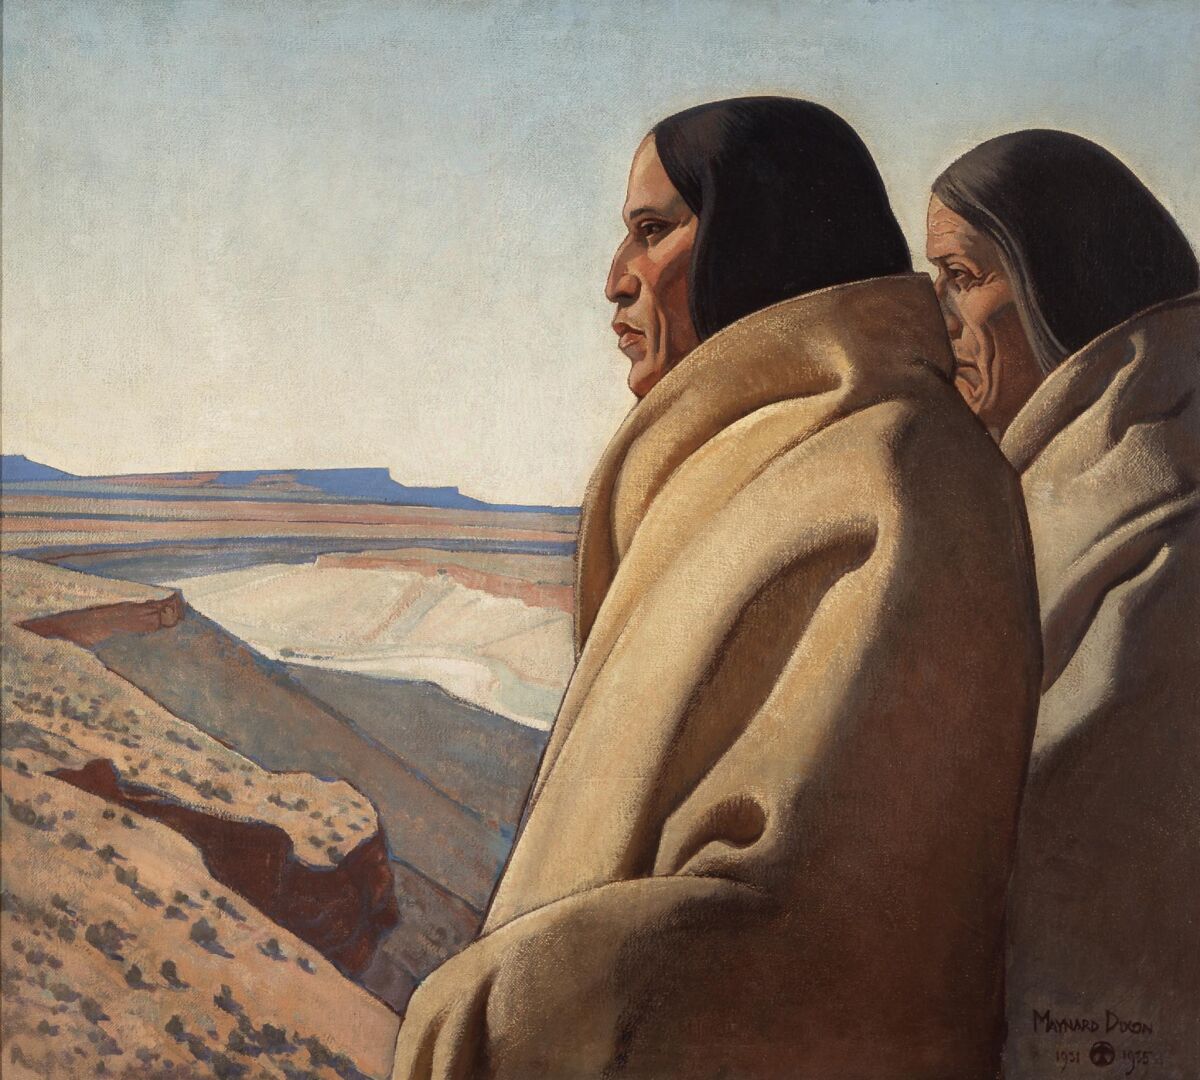 Maynard Dixon's 1931-32 canvas "Men of the Red Earth."